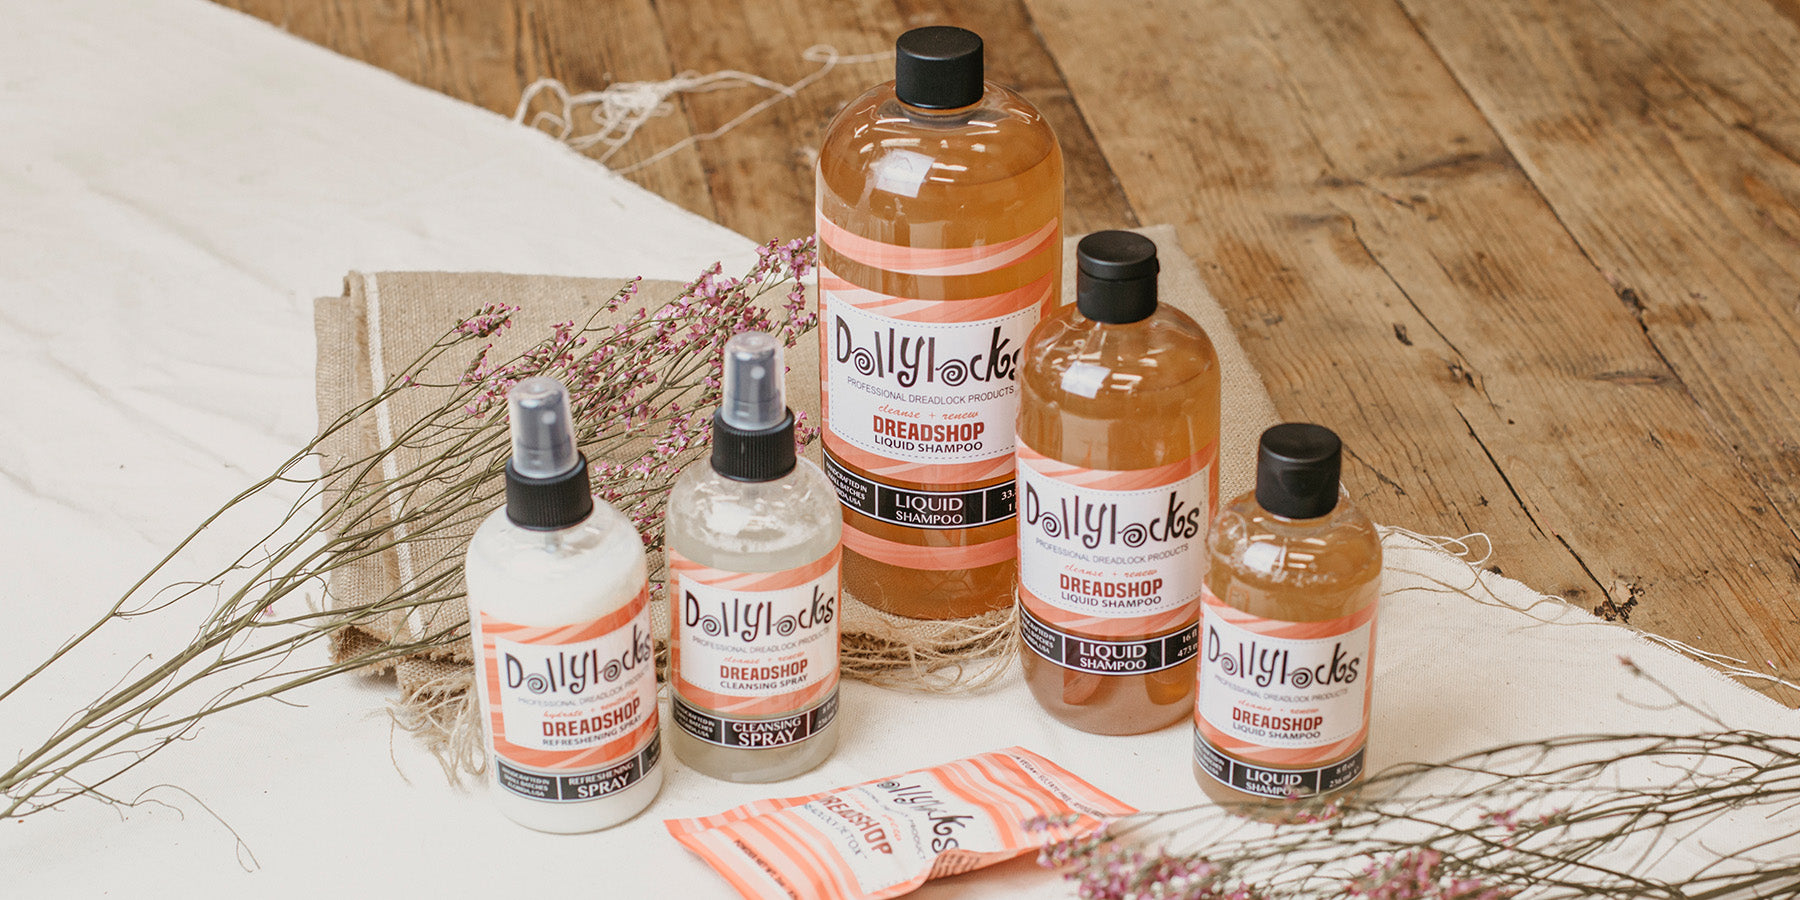 Dreadshop x Dollylocks collection care products